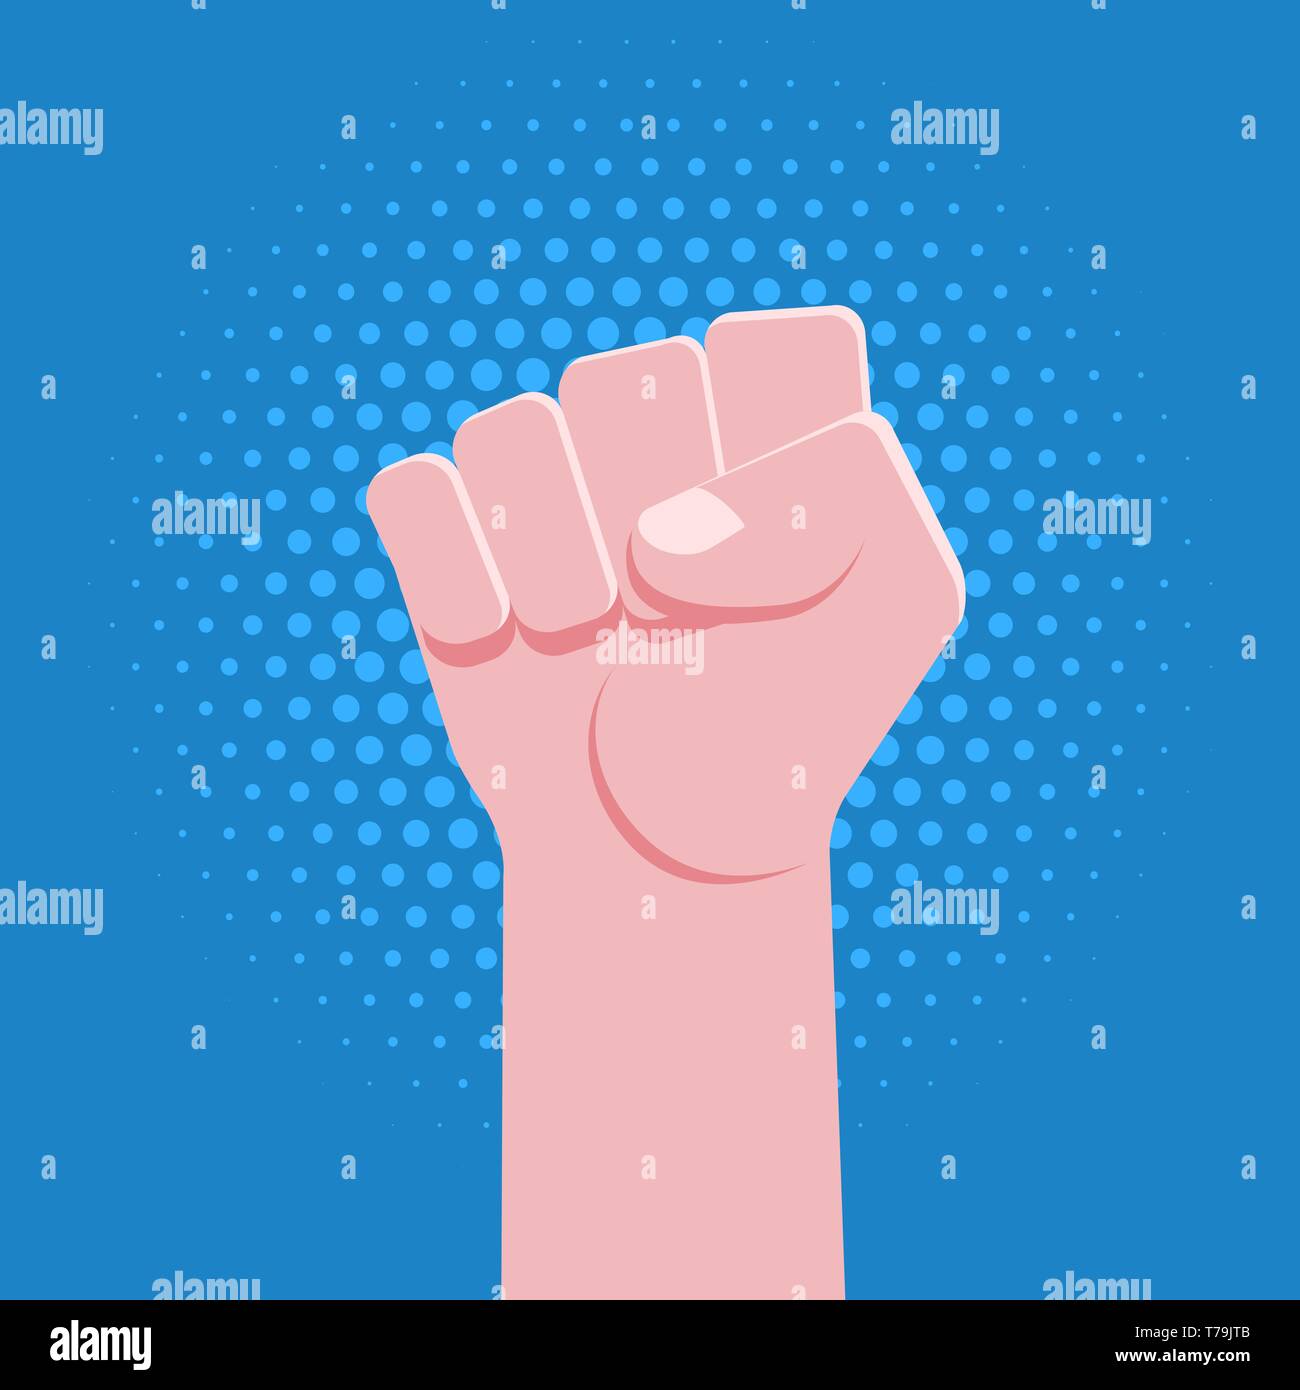 vector symbolic raised clenched power fist male hand protest concept sign vintage illustration retro poster design isolated on blue dotted background Stock Vector